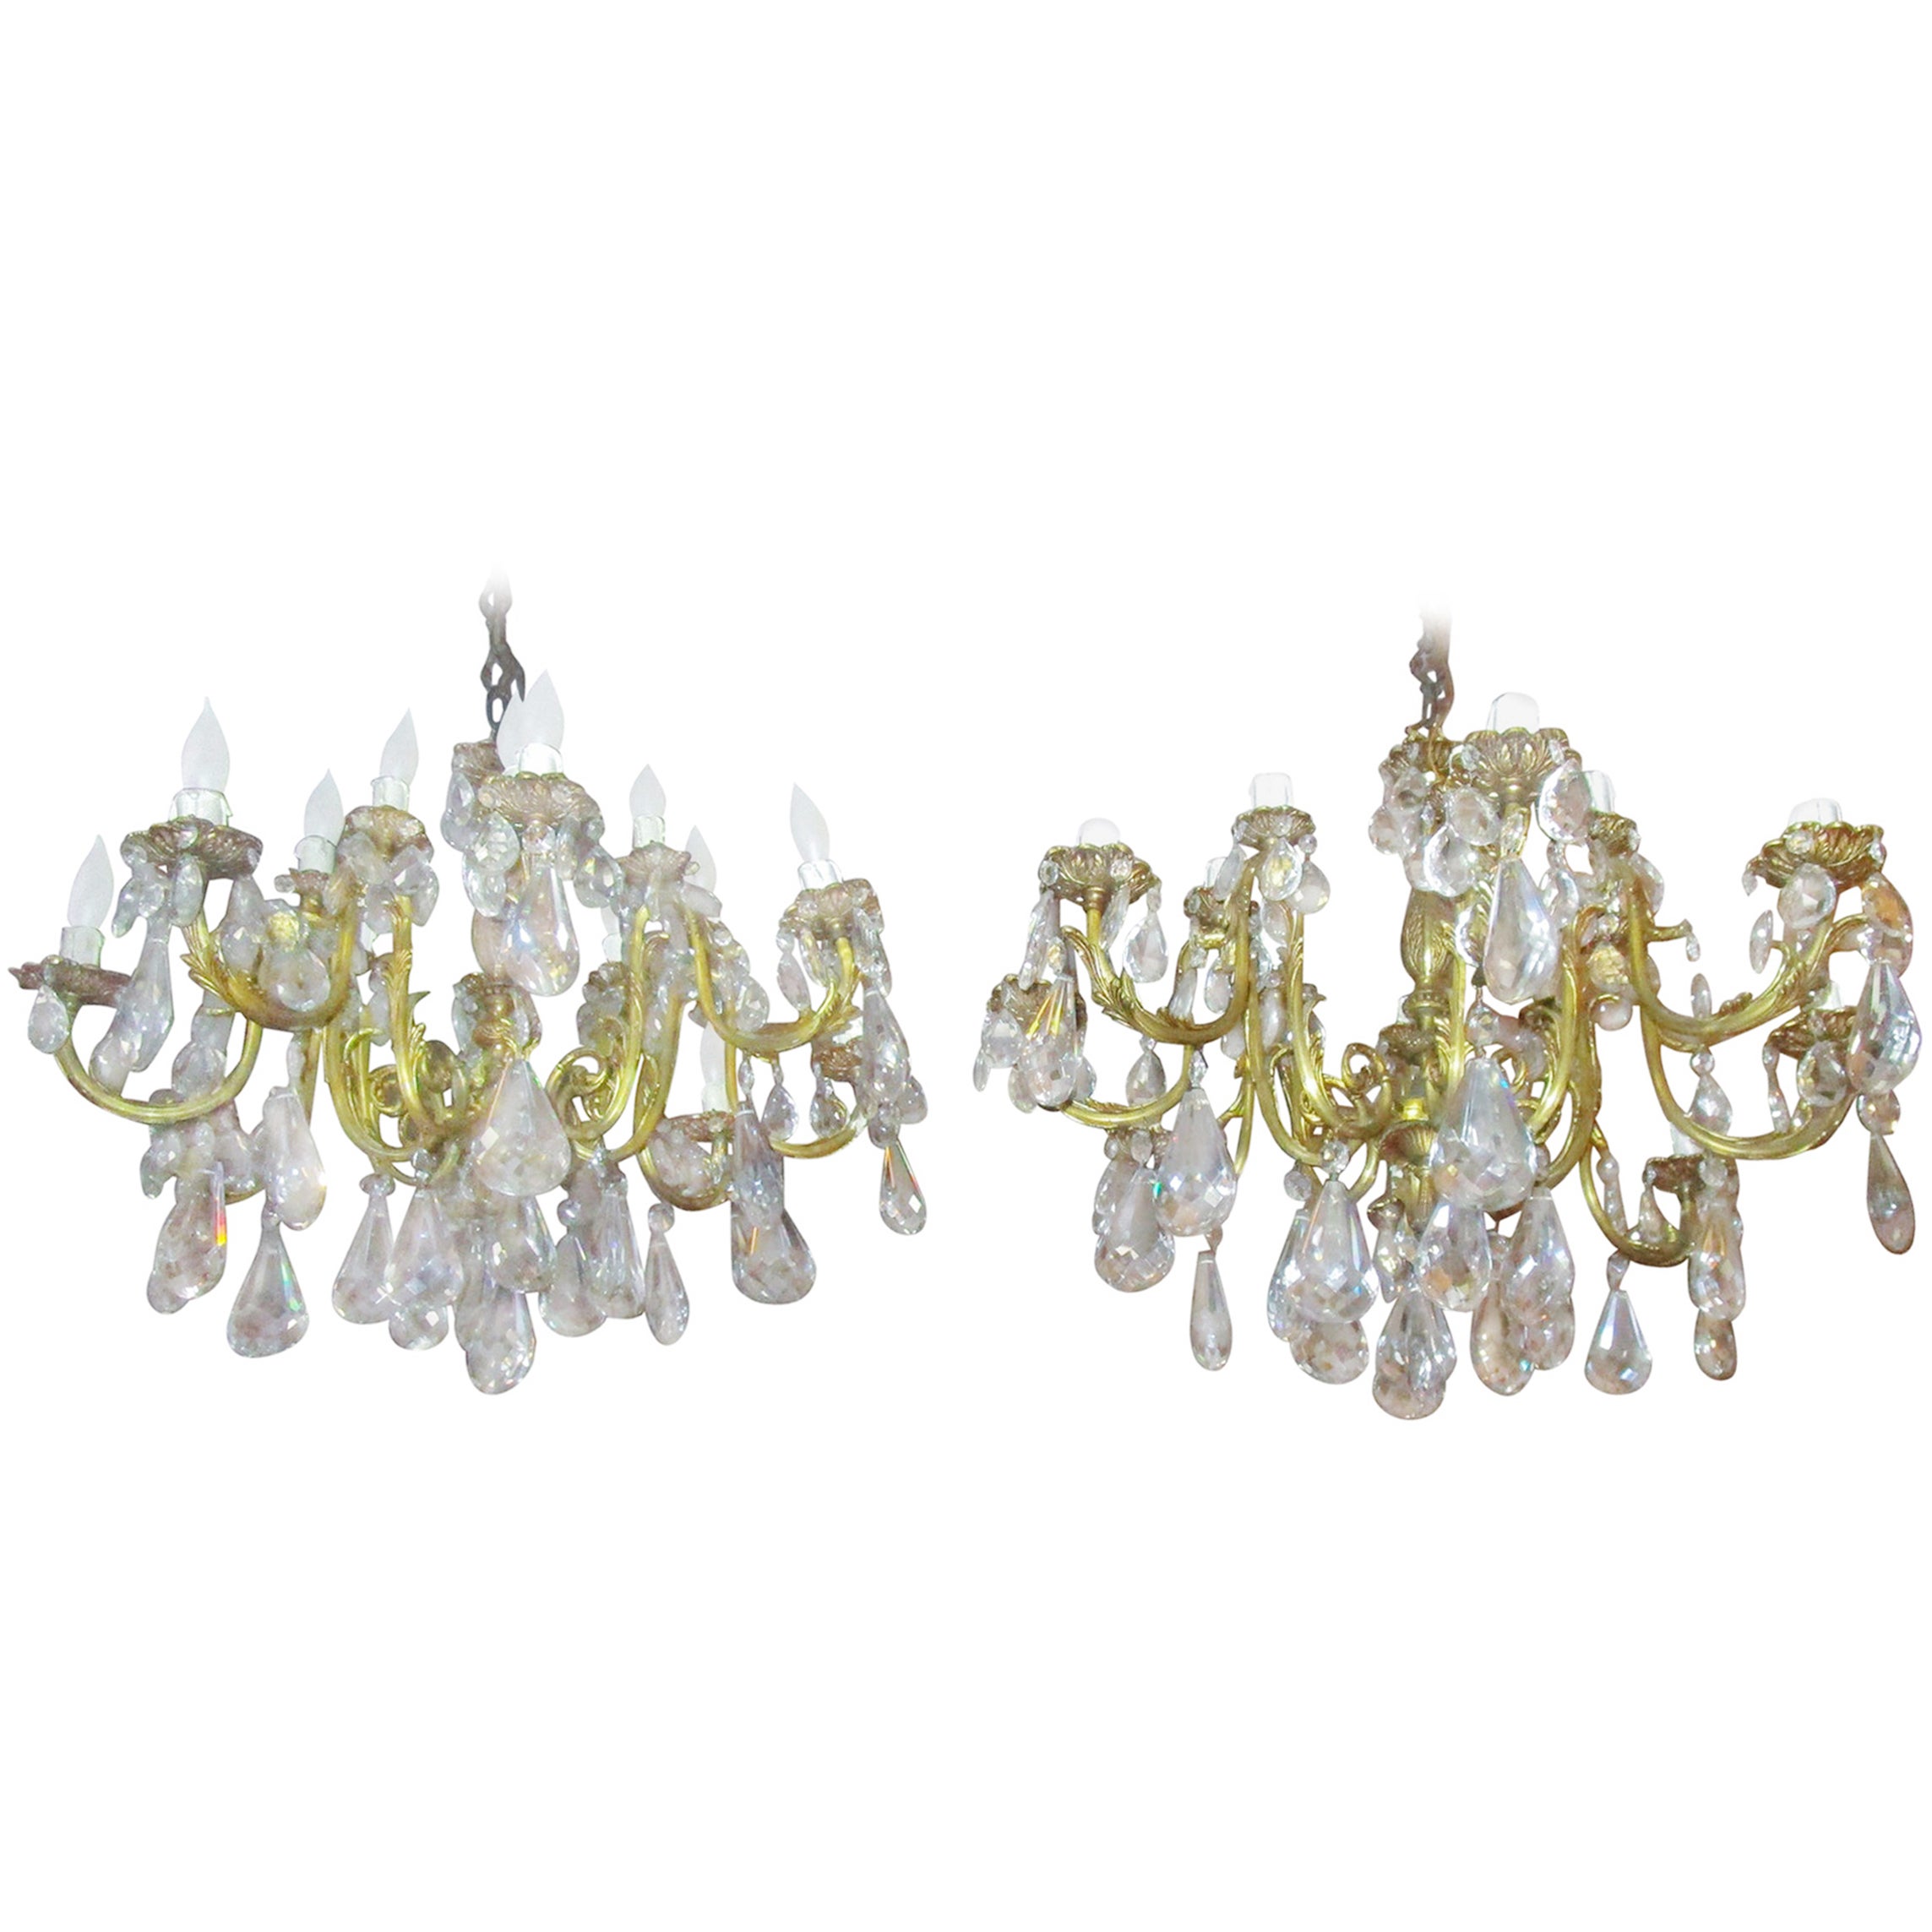 19th C Belle Epoque French Lead Crystal and Brass Sixteen Light Chandelier Pair For Sale